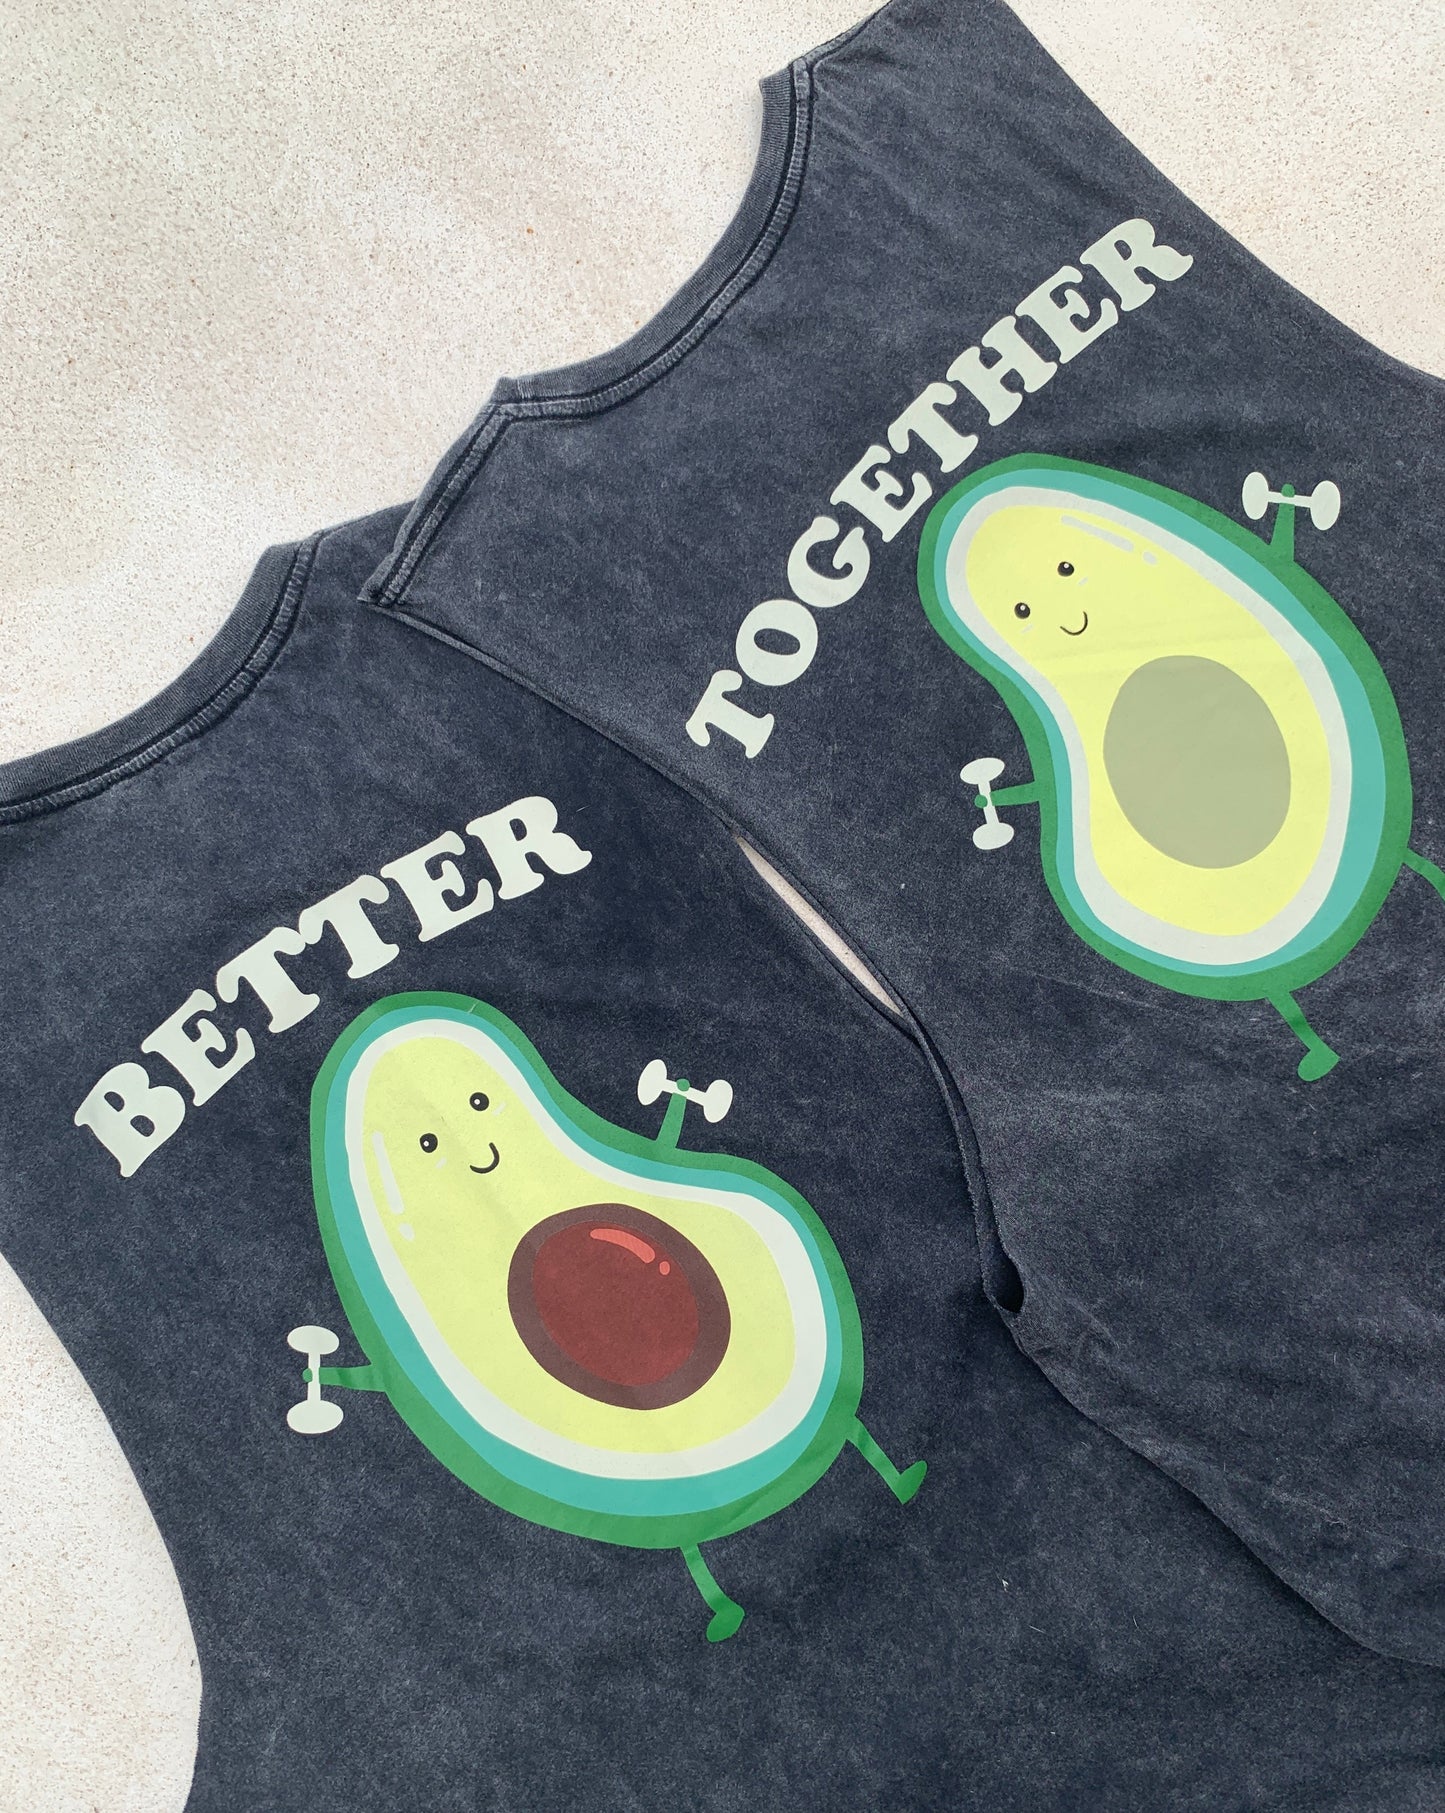 BETTER TOGETHER avocado muscle tank (Together)